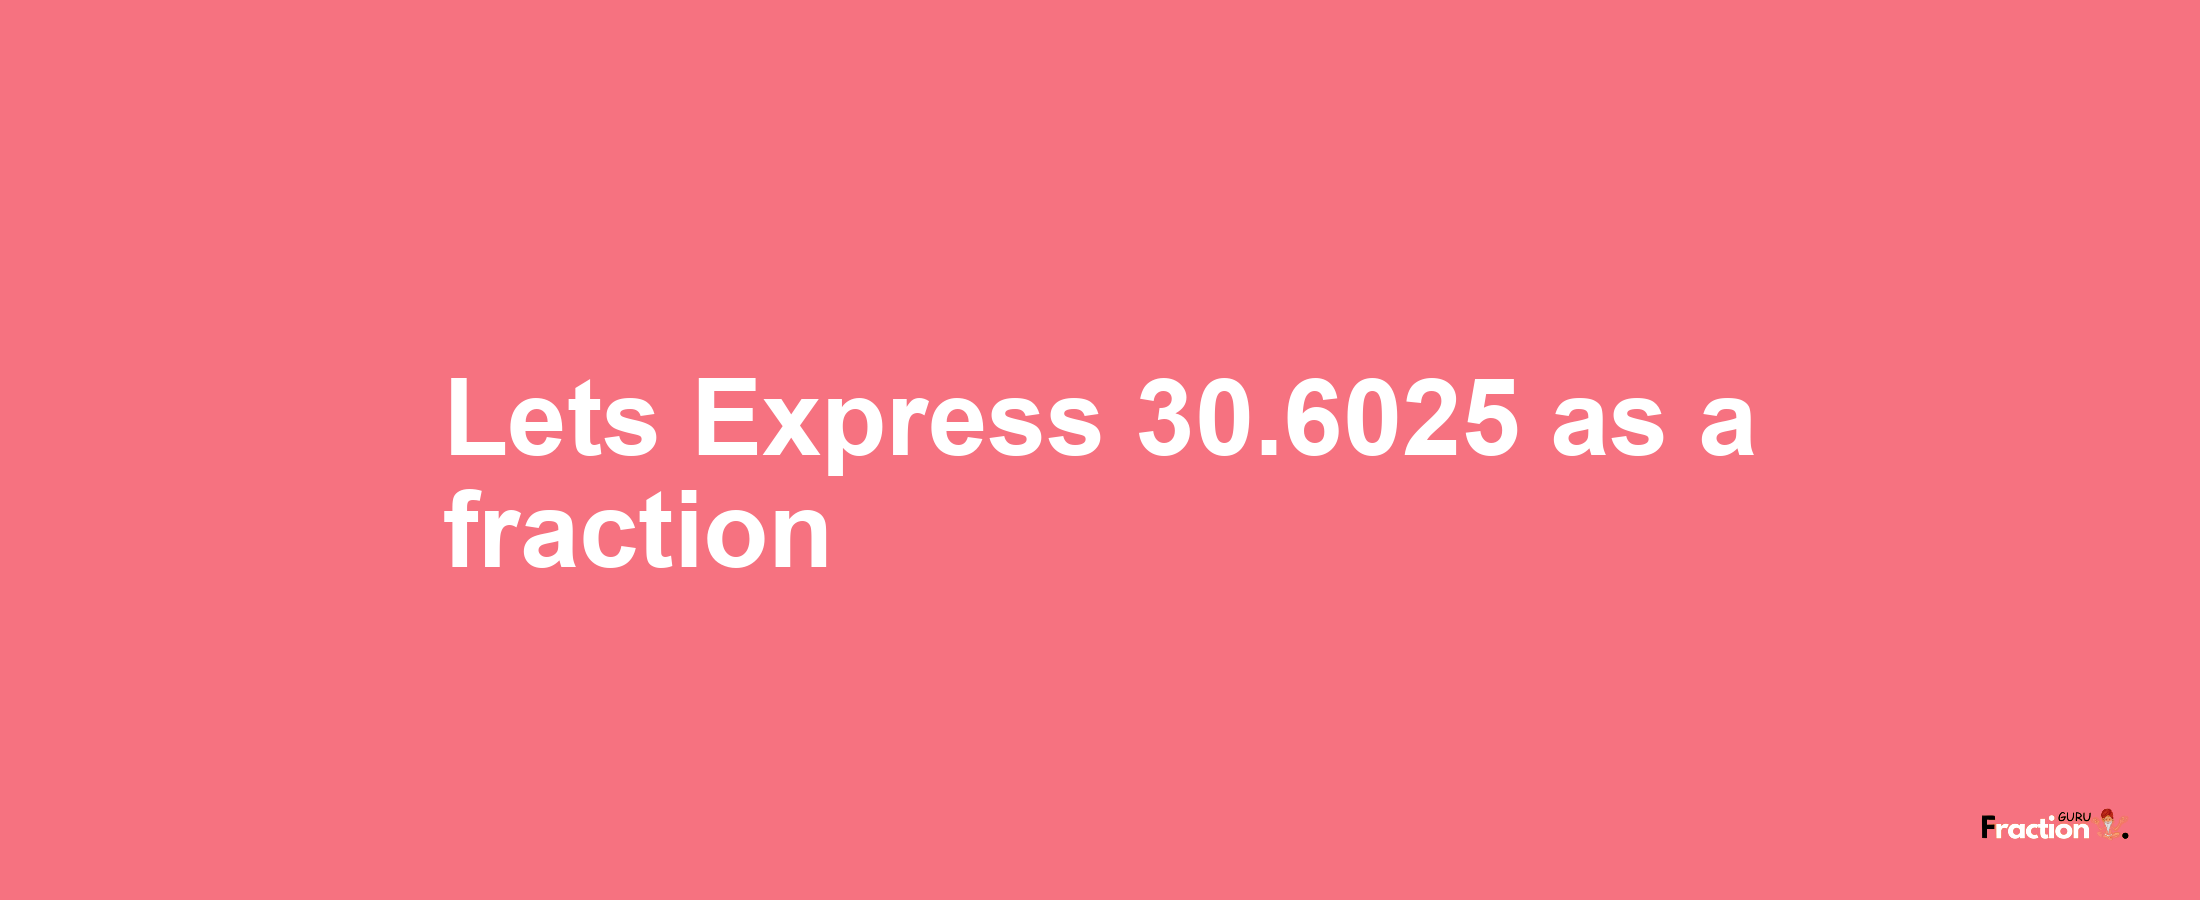 Lets Express 30.6025 as afraction